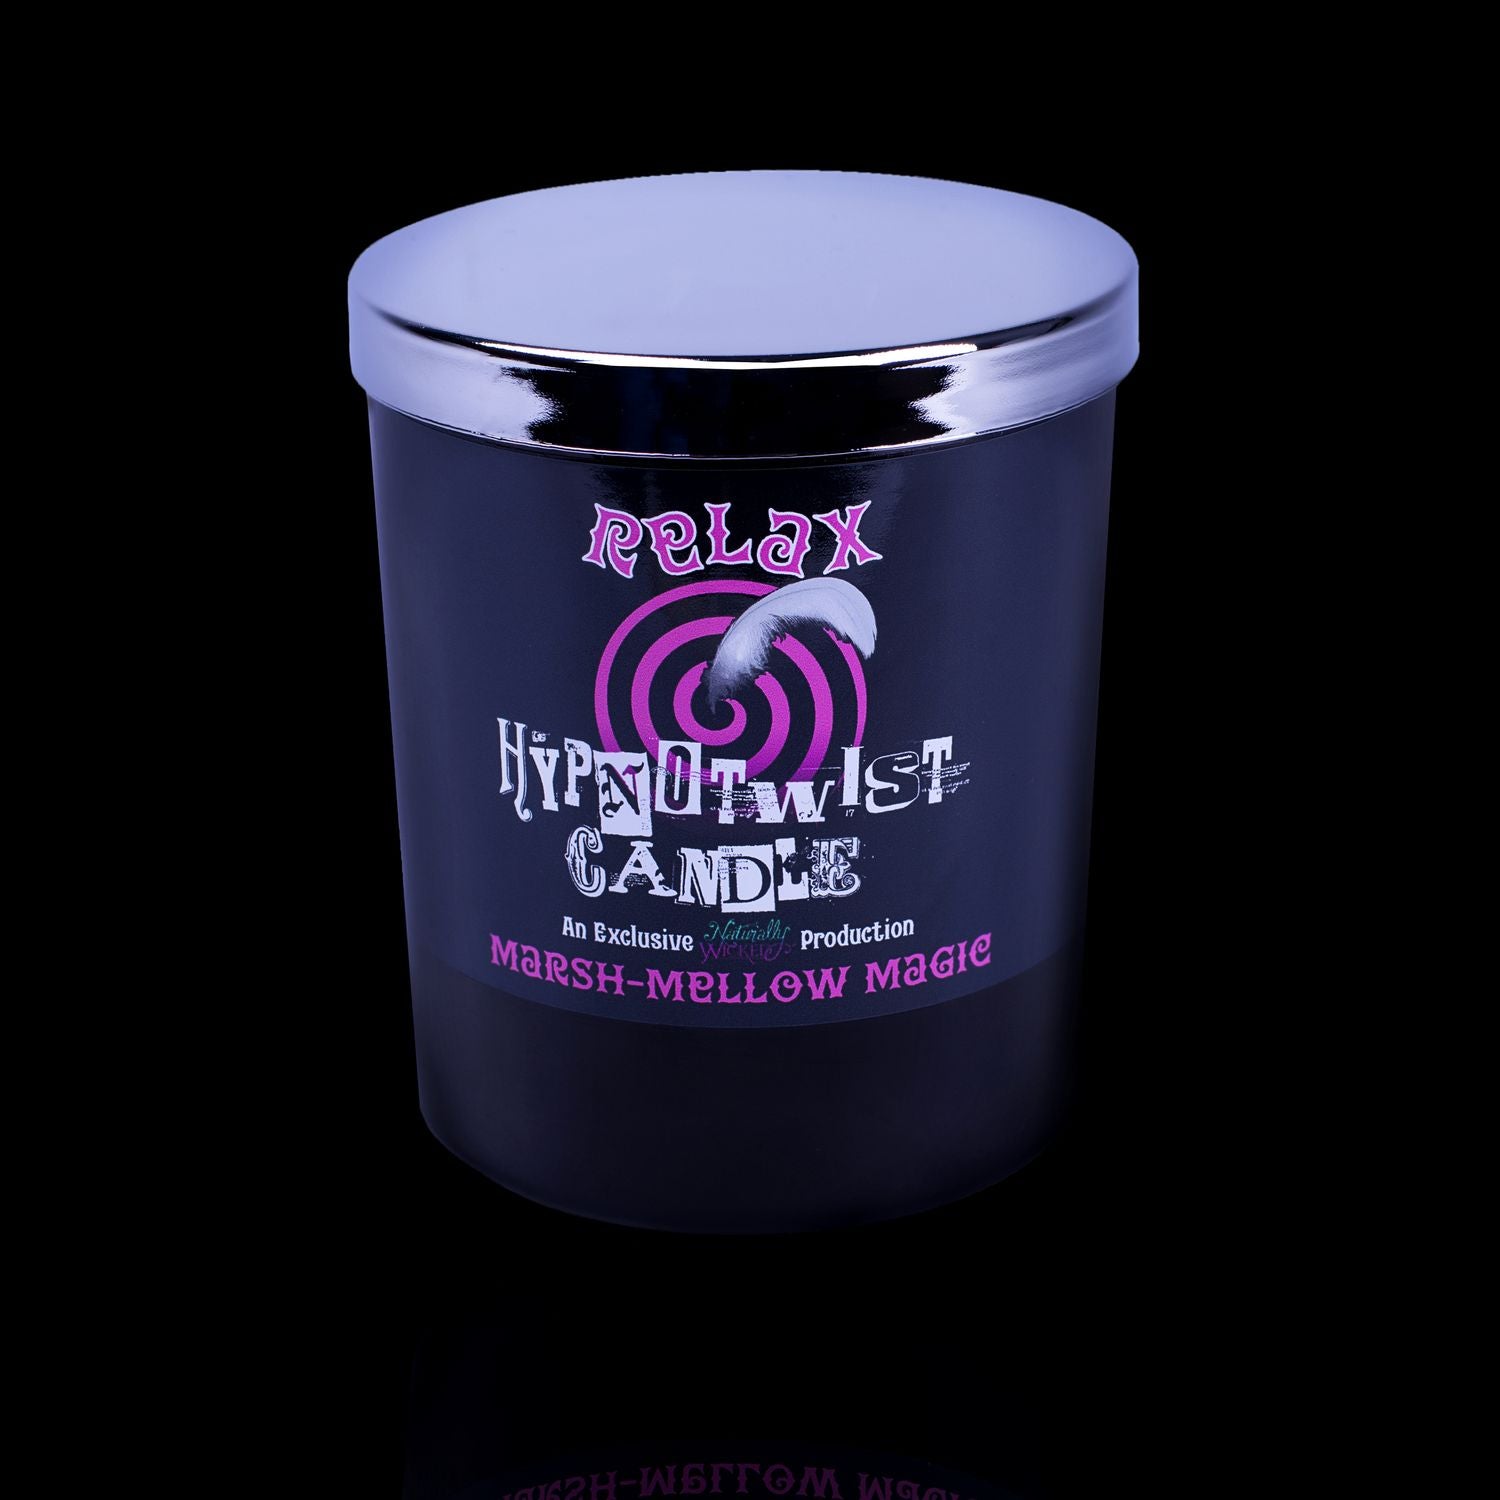 Experience The Ultimate Relaxation With The Naturally Wicked Hypnotwist Relax Candle Featuring Plant-based Soy Pink Wax Scented With Marsh-Mellow Magic & Includes A Rose Quartz Crystal Spinning Top & Mirrored Lid